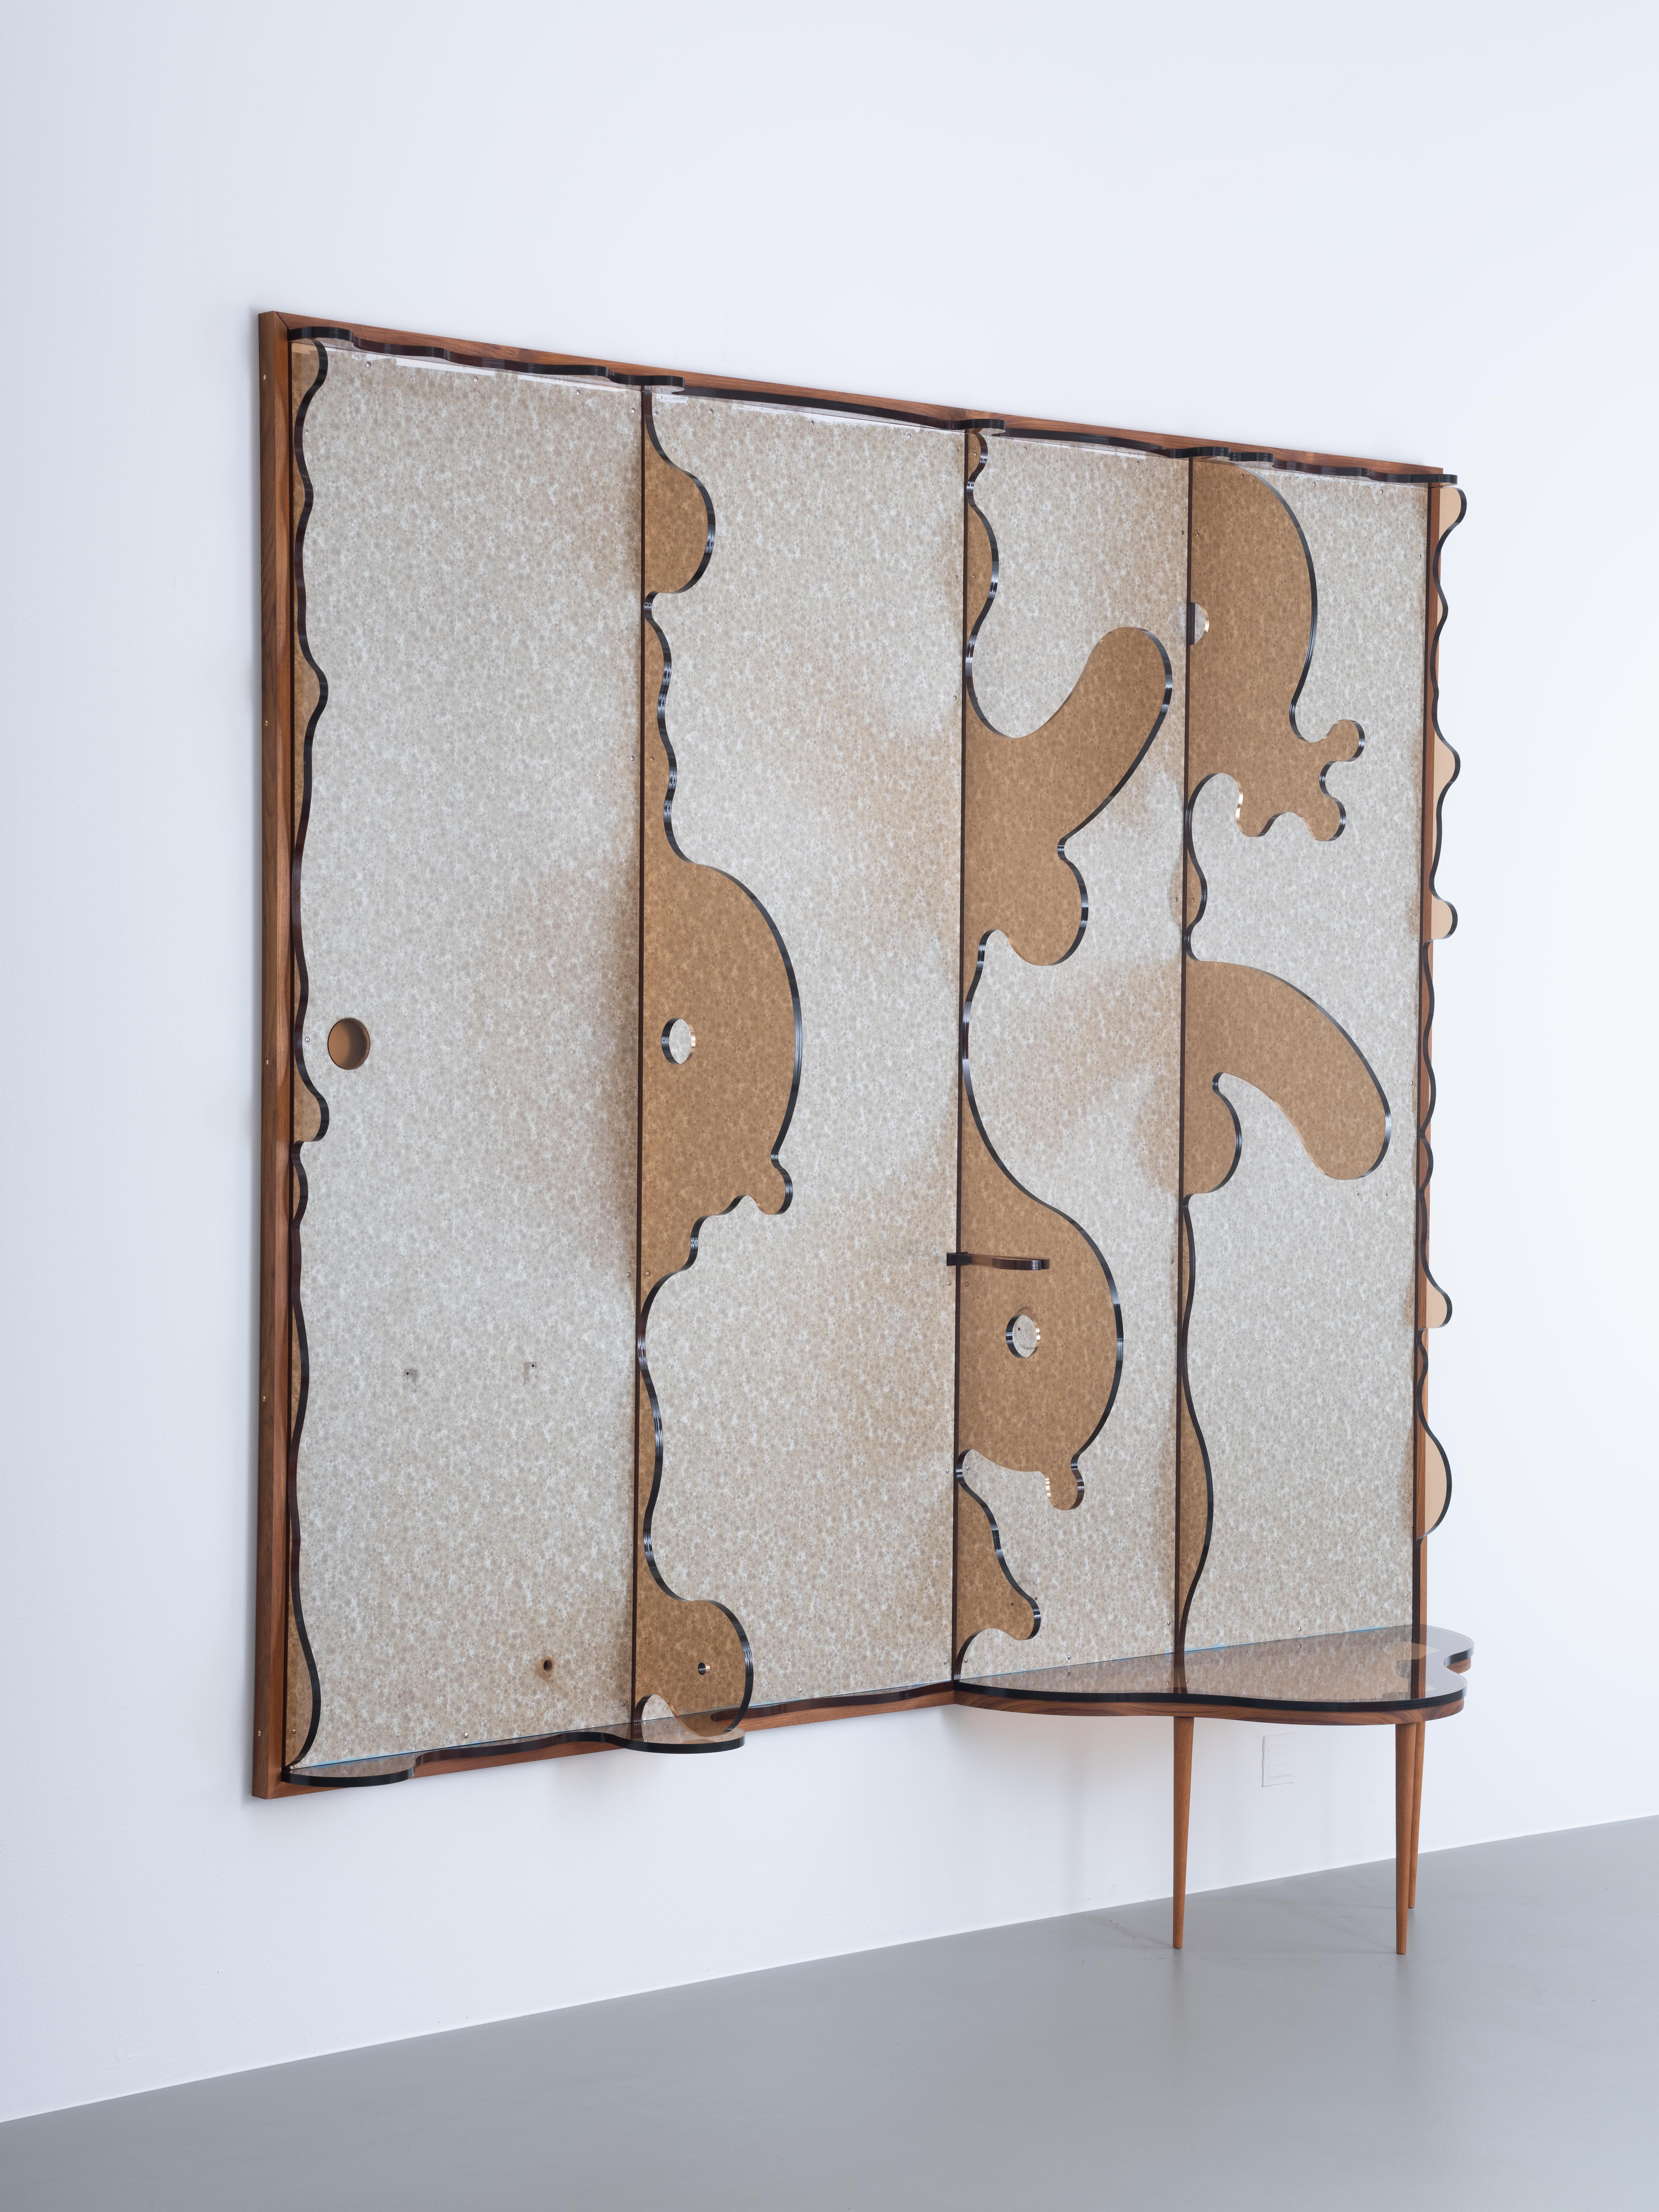 Clay Ketter, Persson’s Dream, 2019, formica laminate on plywood, wood frame, laser-cut acrylic sheet, teak, hardware, 245 x 248 x 58 cm